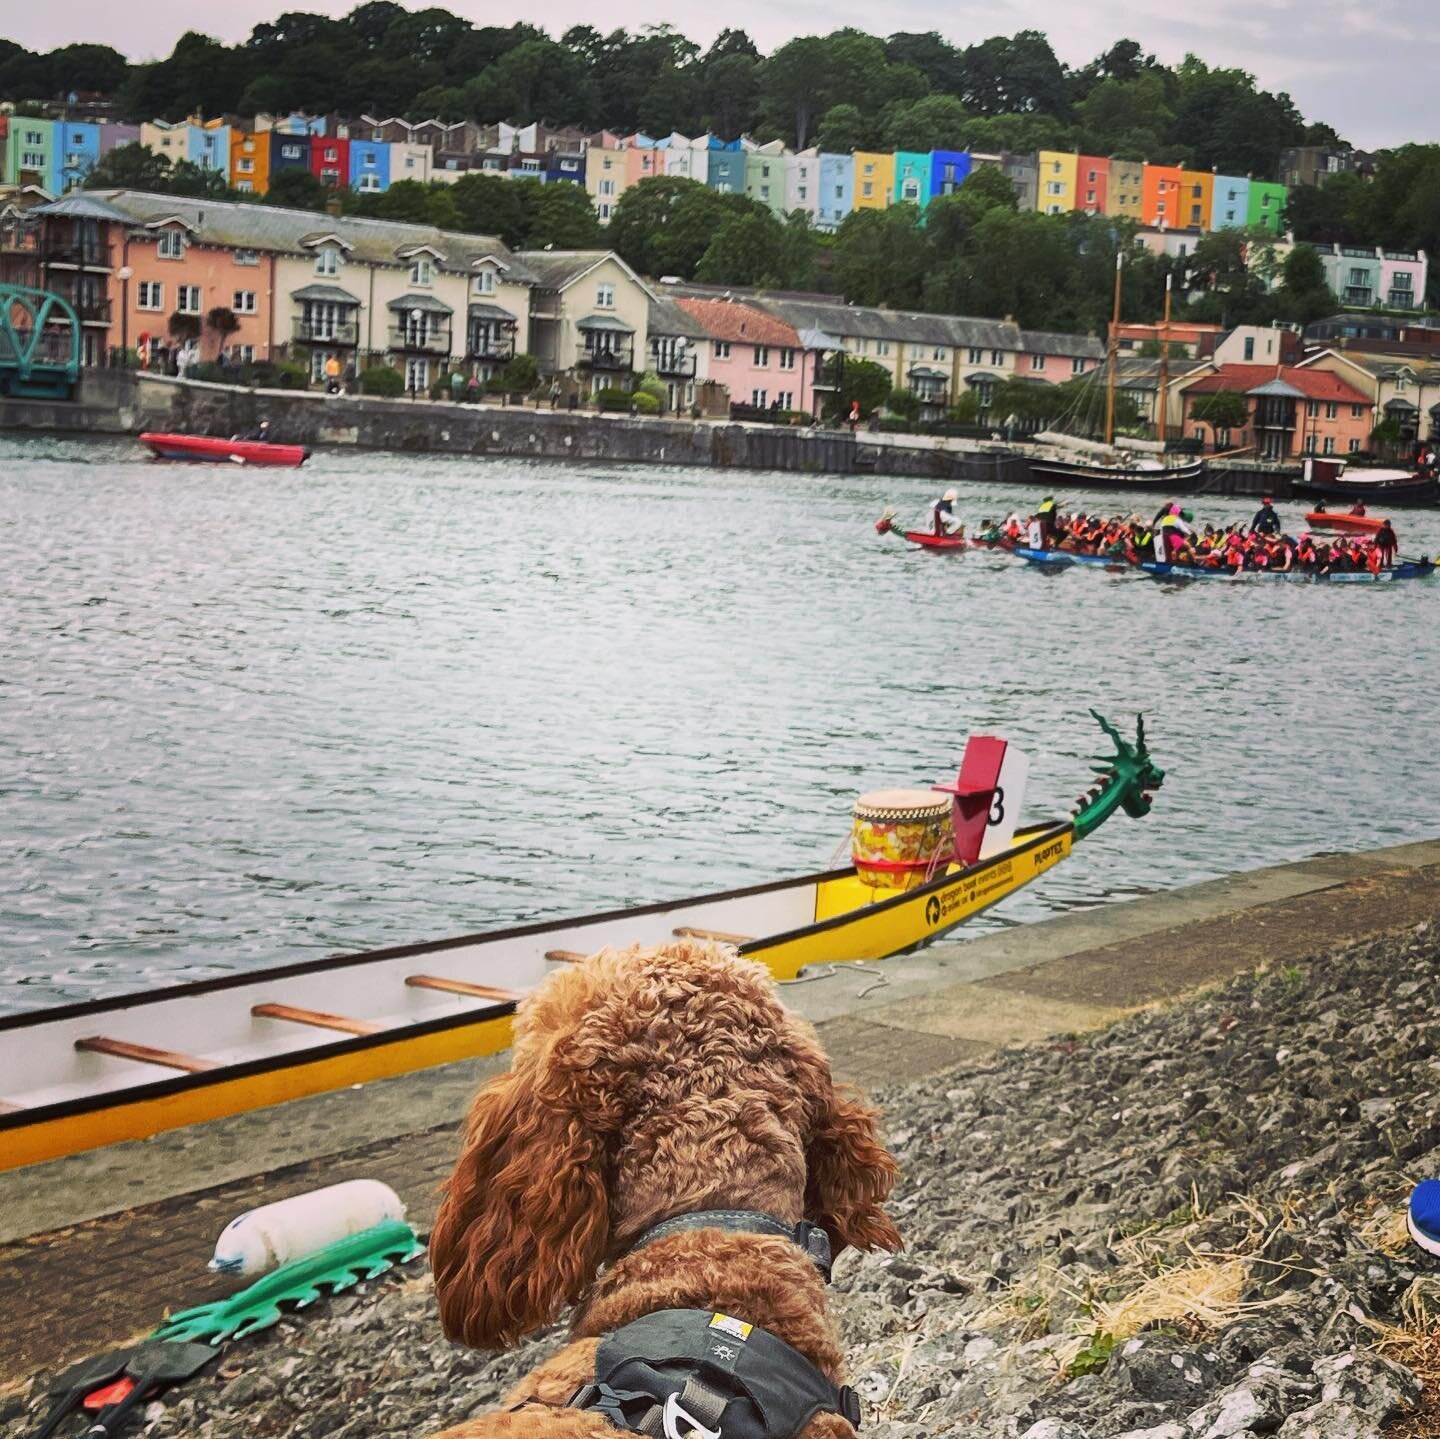 When I heard the chants and drumming echoing across the city and the Bristol hillsides, I knew todays Dragon Boat Festival was going to be a good one&hellip;

🥁🥁🥁

The energy each participant brought to their boats and the racing left us buzzing, 